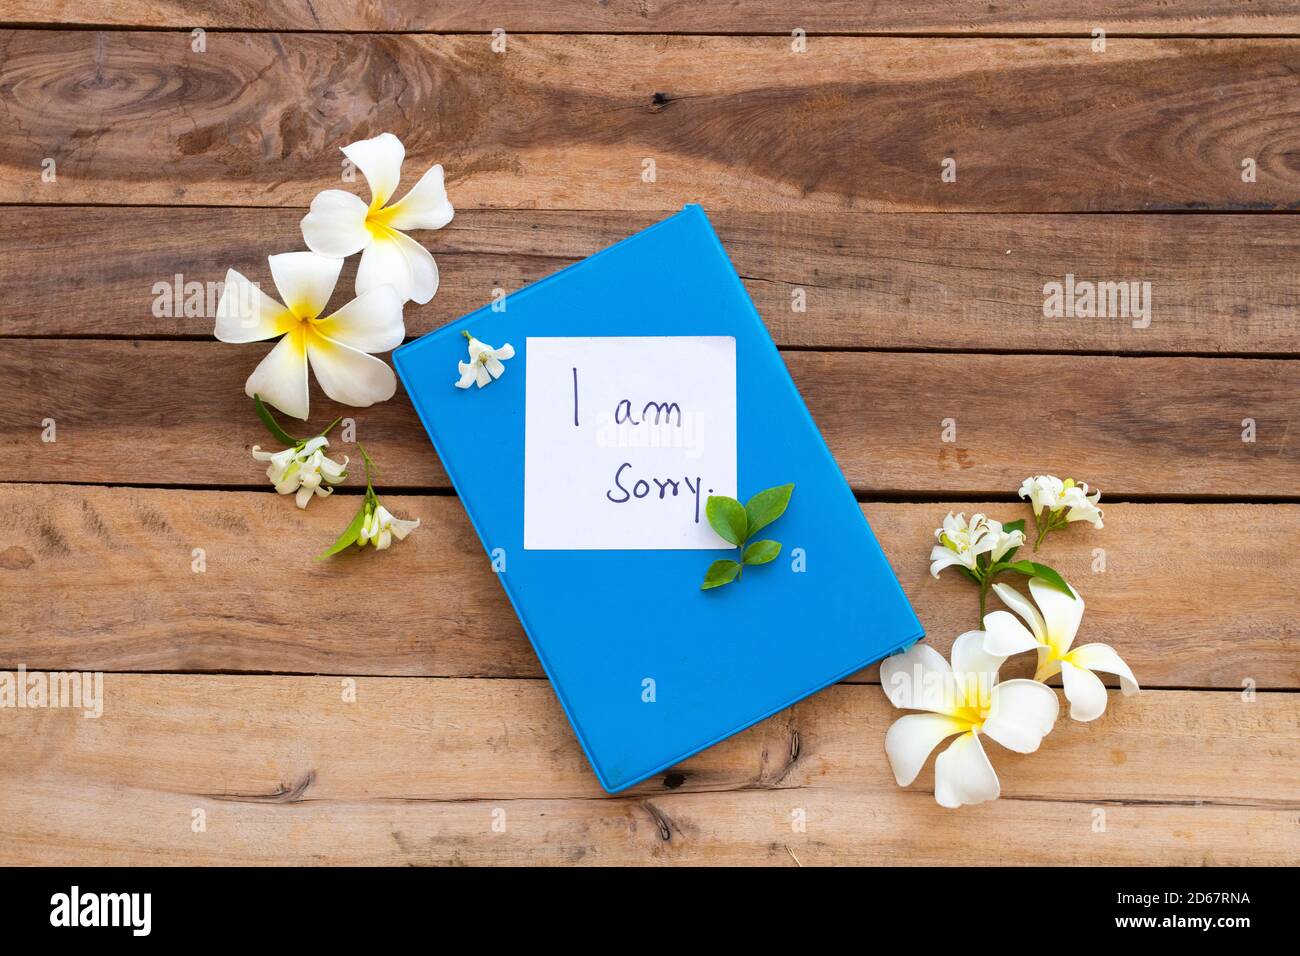 i am sorry message card handwriting on blue diary book with white flowers frangipani ,jasmine arrangement  flat lay style on background wooden Stock Photo